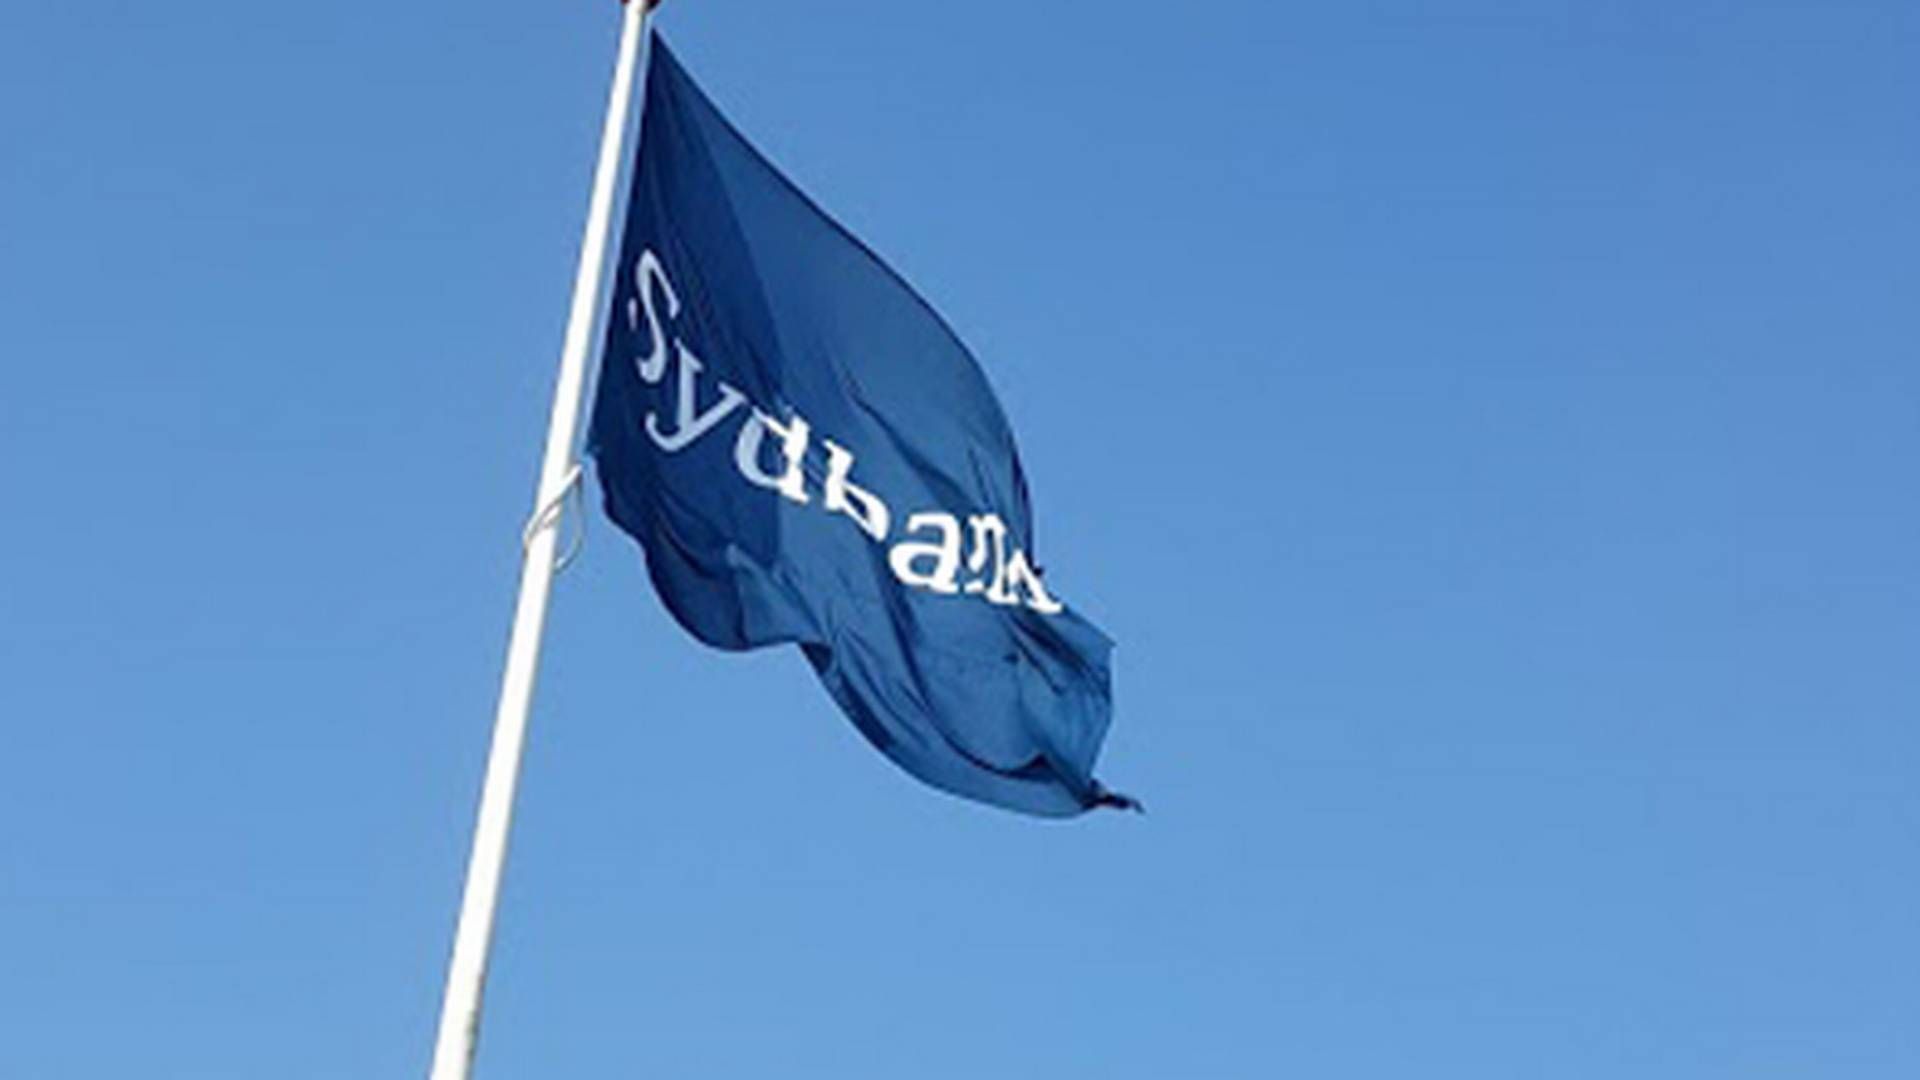 Denmark's Sydbank has a thriving business in Germany, close to the bank's headquaters.